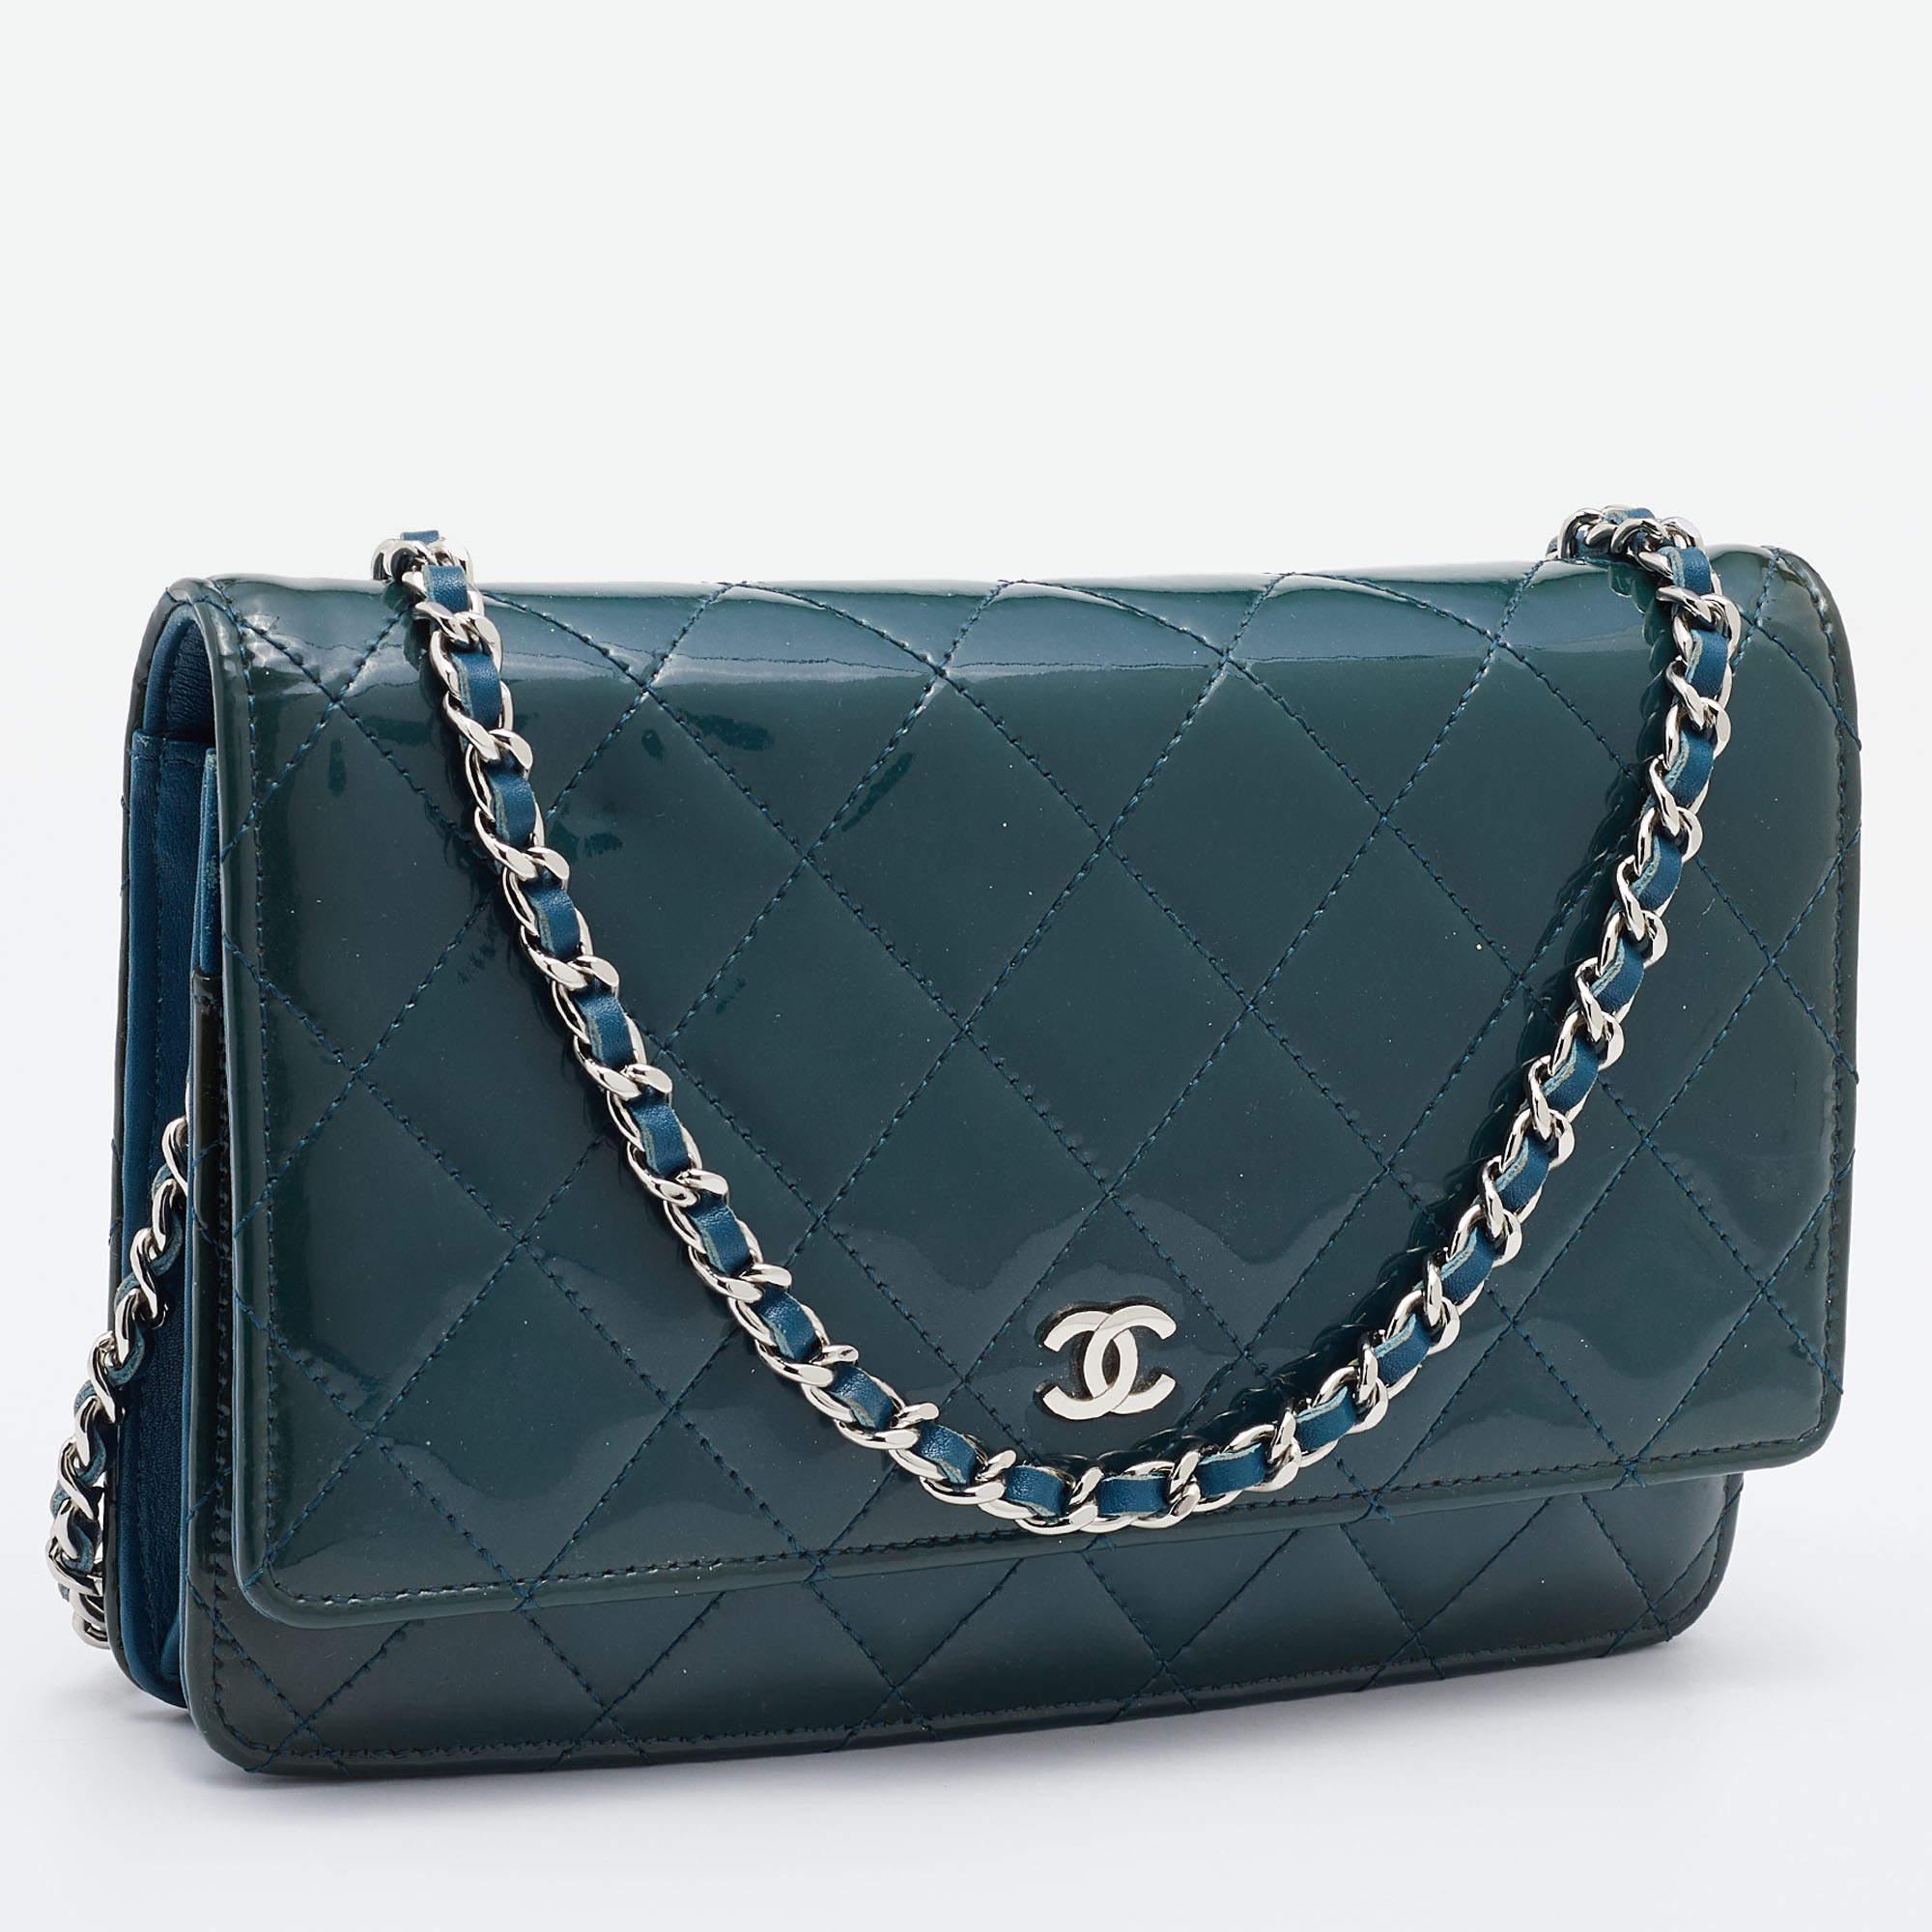 Women's Chanel Teal Blue Quilted Patent Leather WOC Clutch